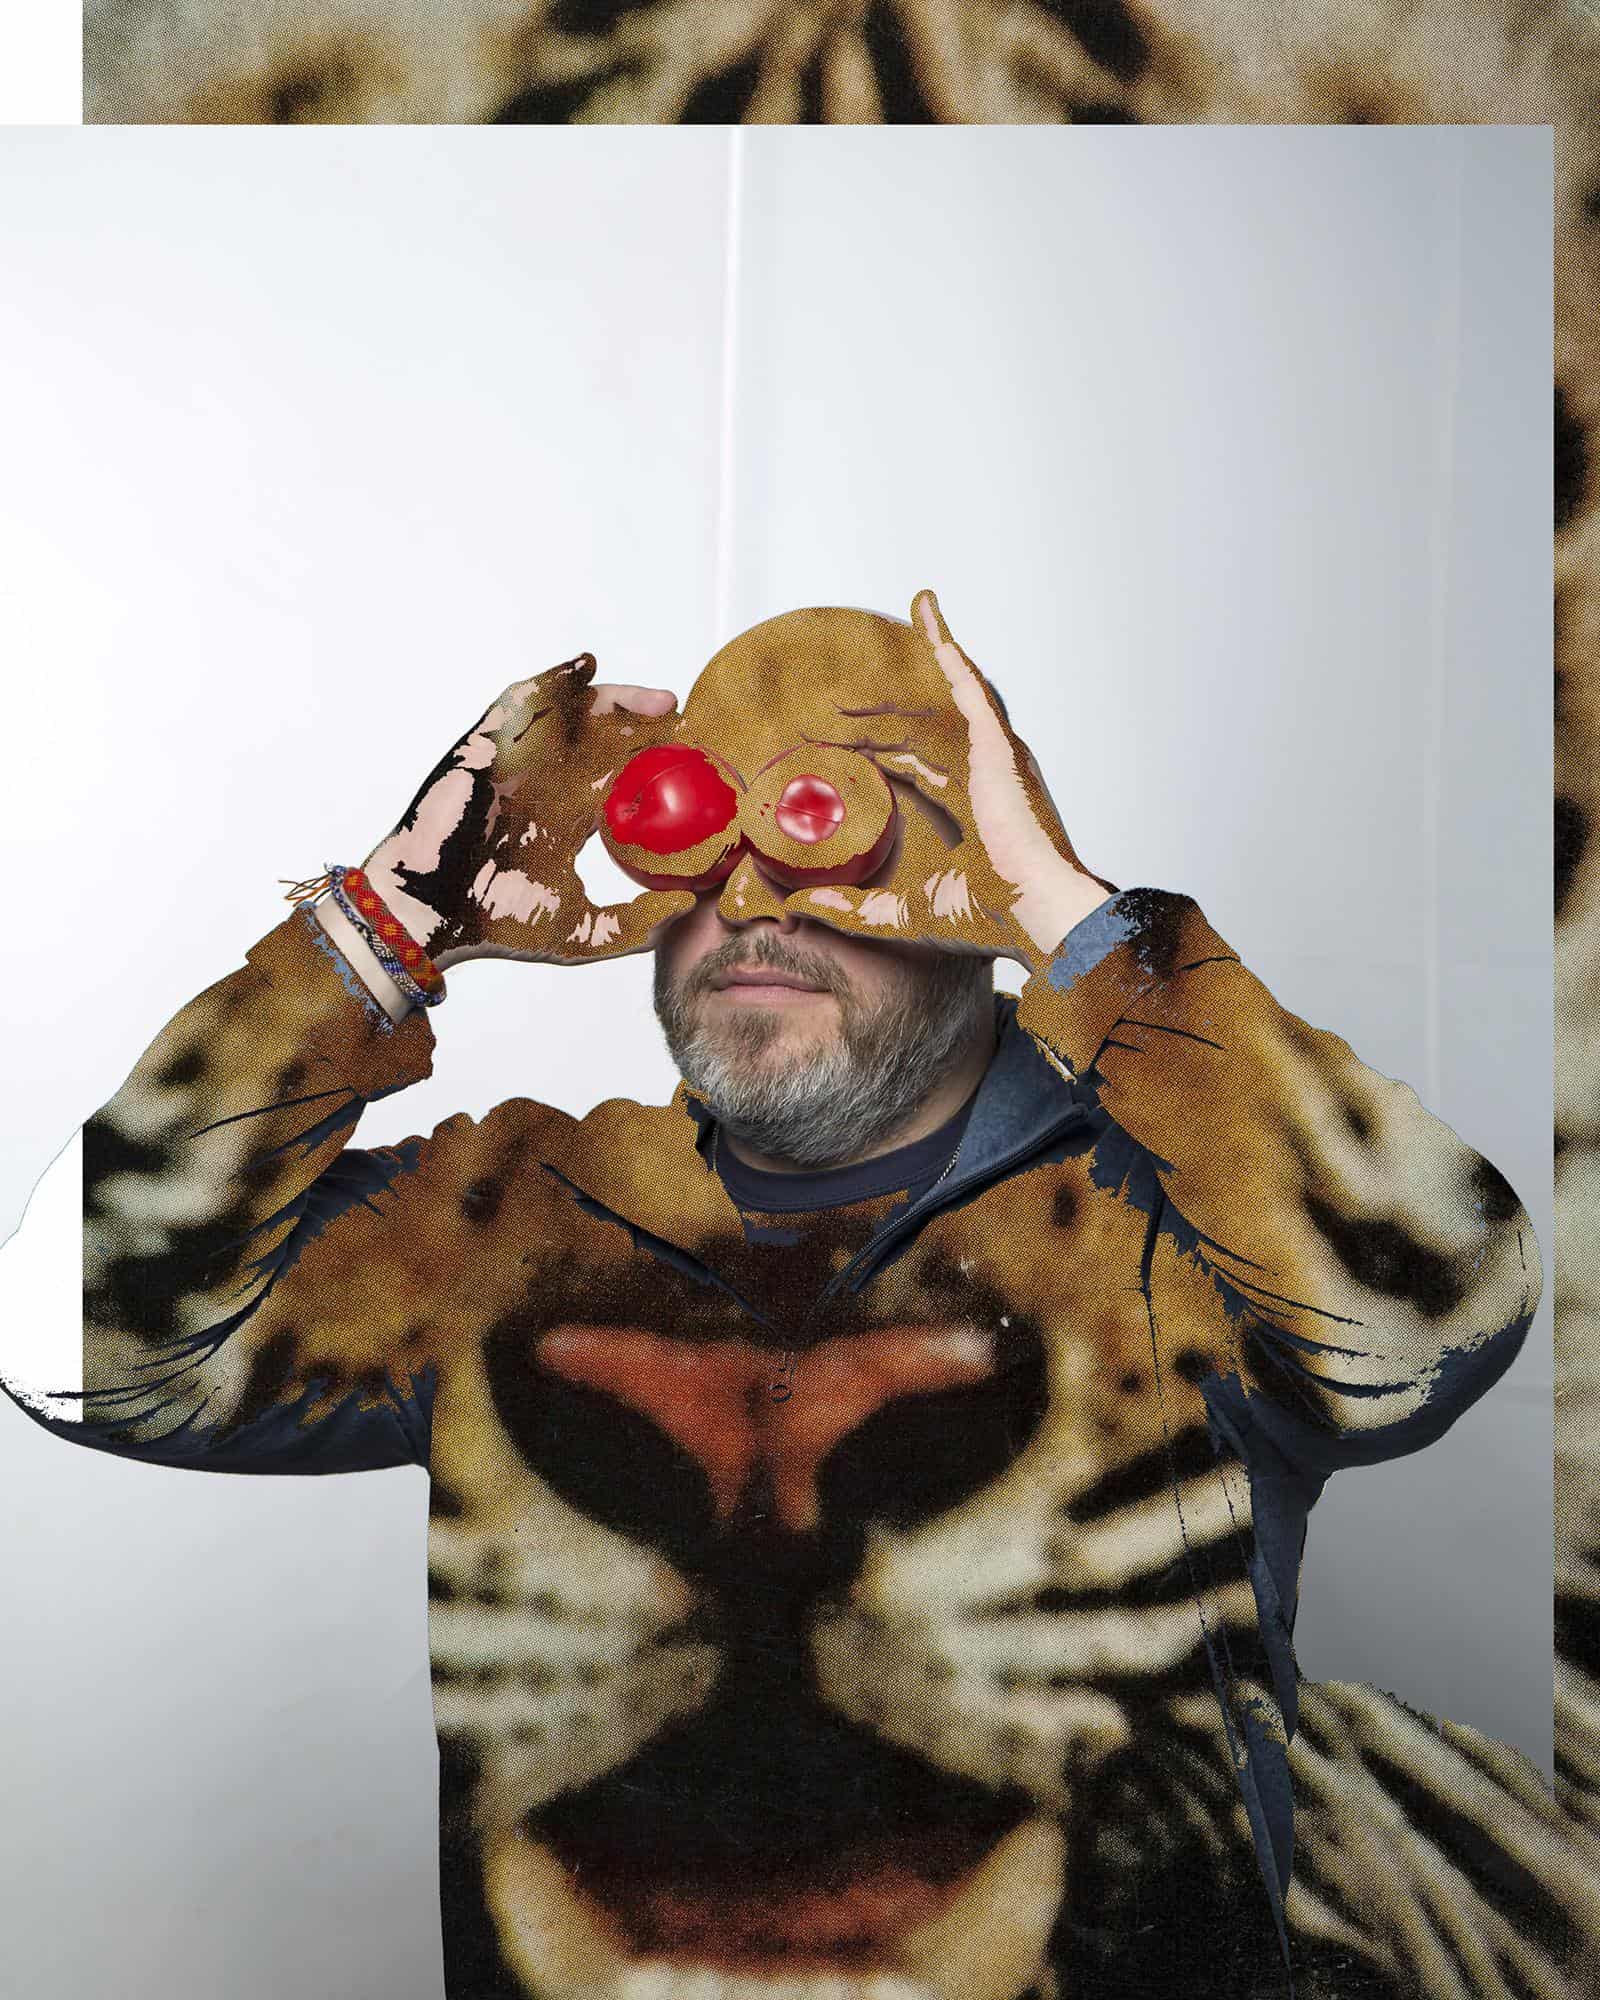 Monique Atherton, Untitled (Jerry with Apple Eyes), 2016. Photographic print, 10x8 inches.